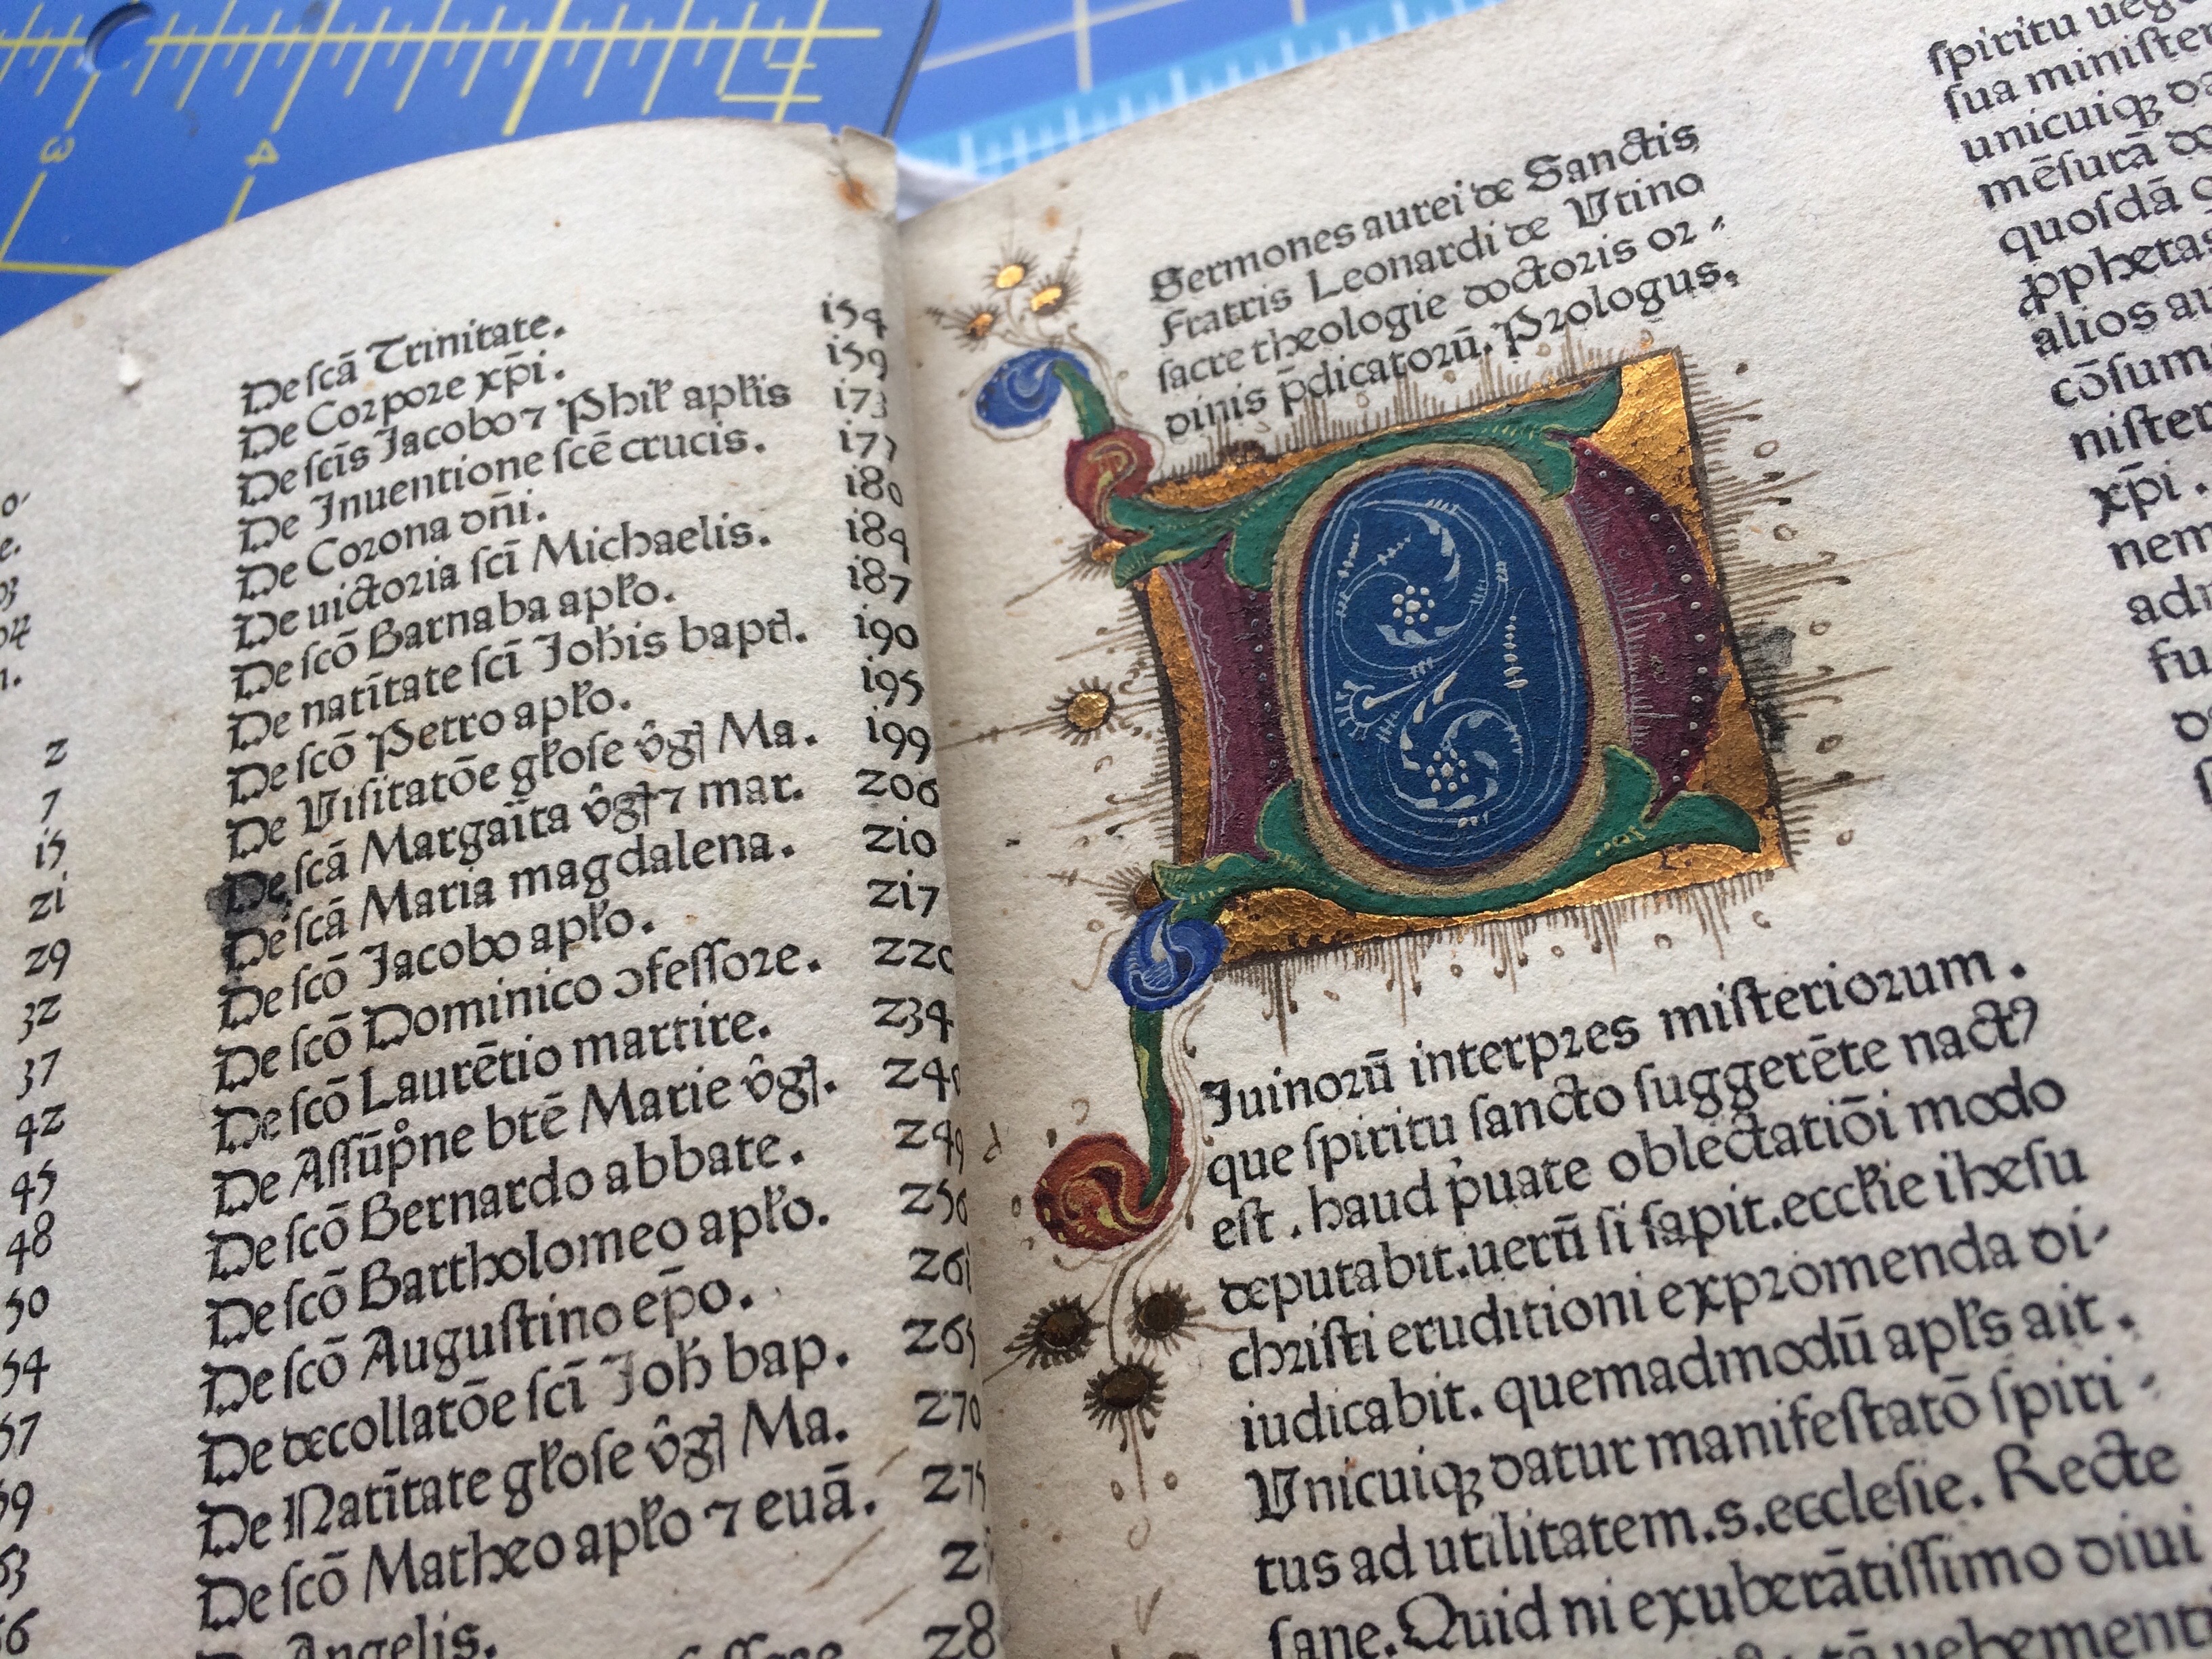 This illuminated initial D points to the book’s history in the transition from manuscript to print technologies. 